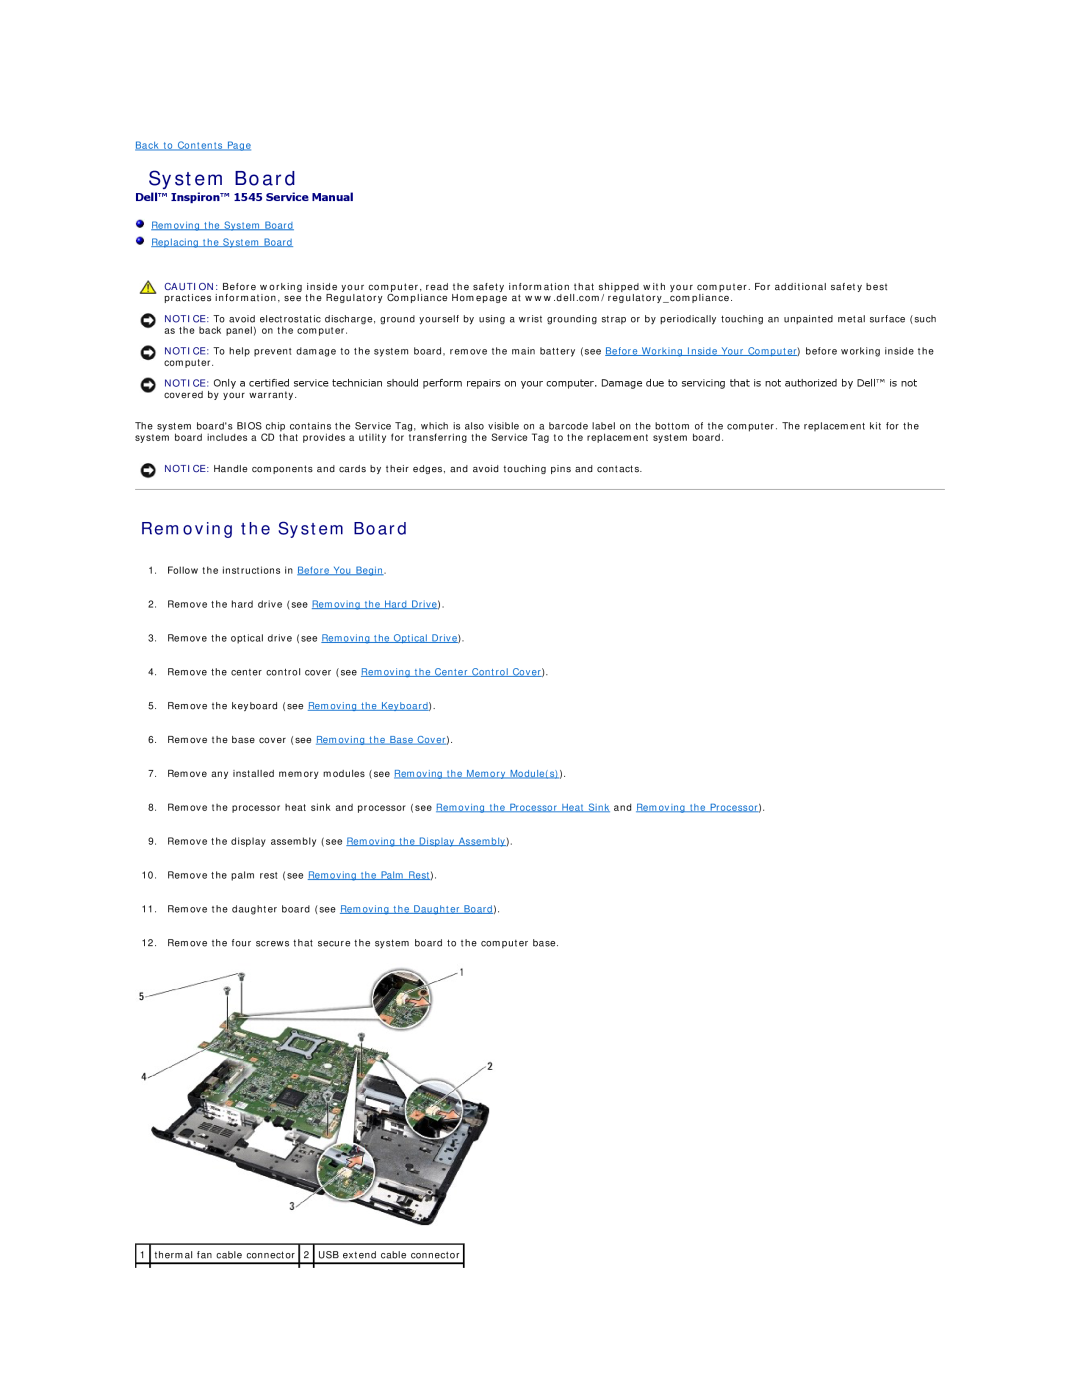 Dell manual Removing the System Board Replacing the System Board, Dell Inspiron 1545 Service Manual 